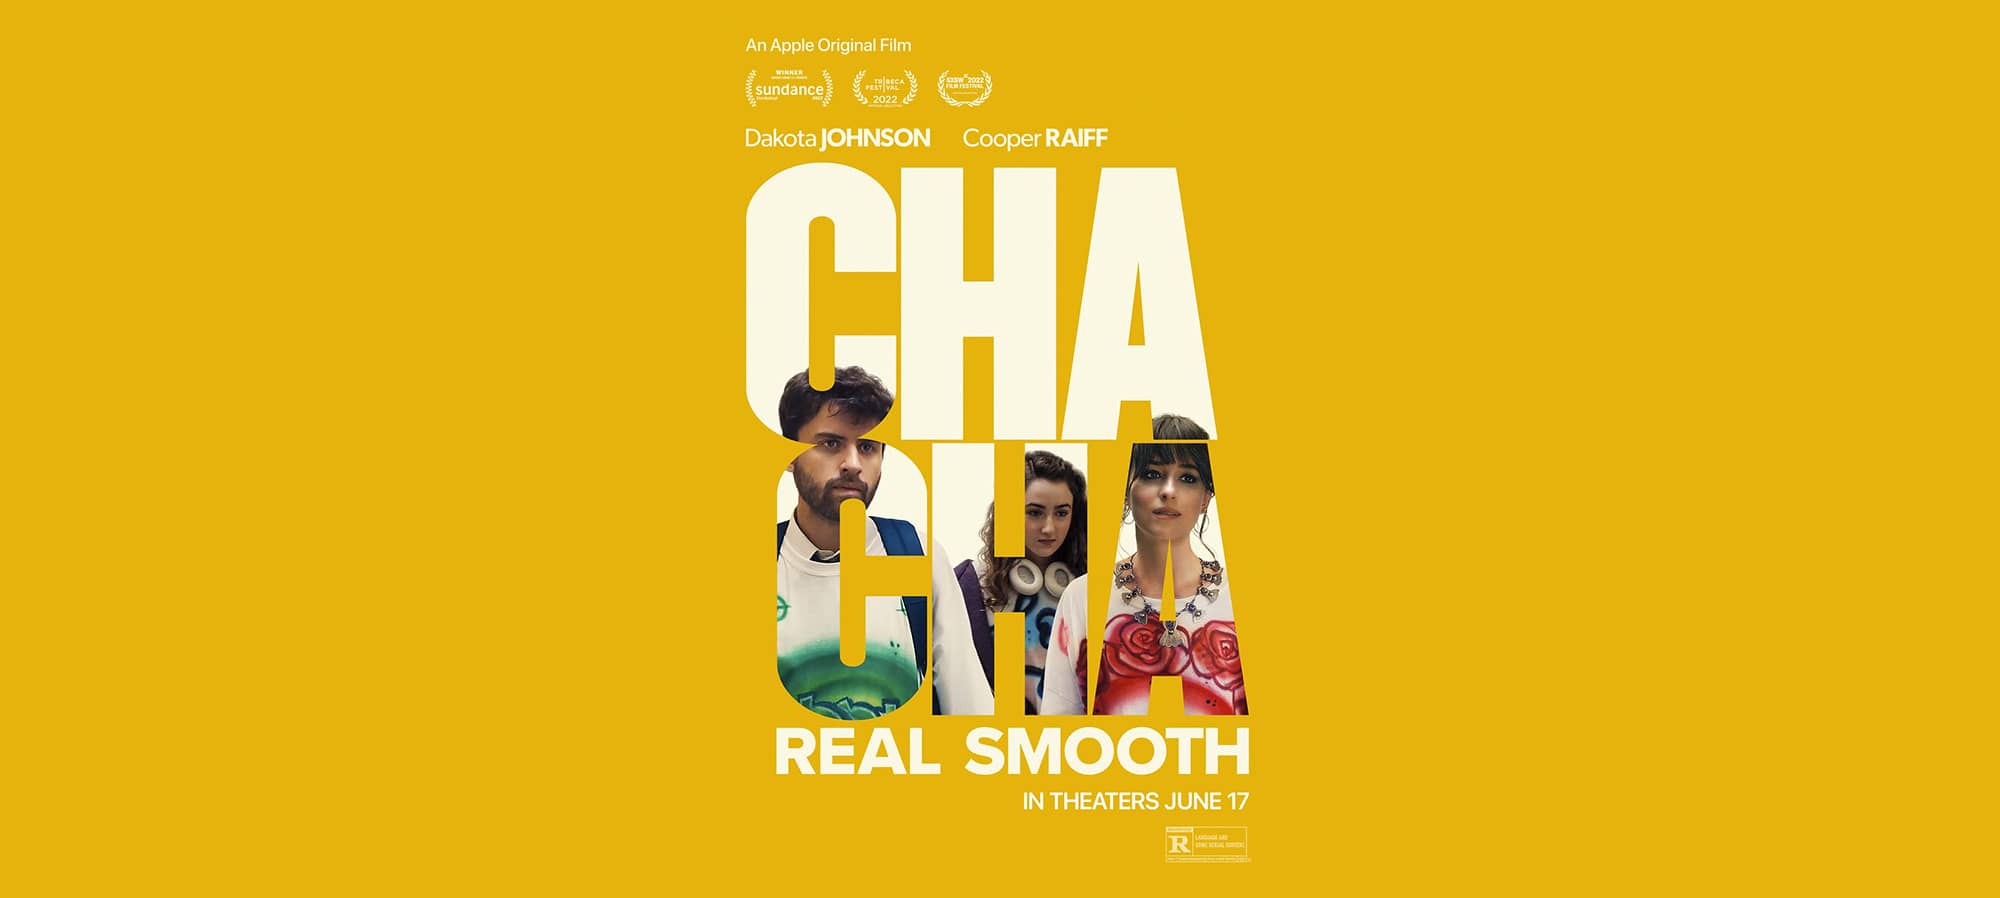 Cha Cha Real Smooth movie cover